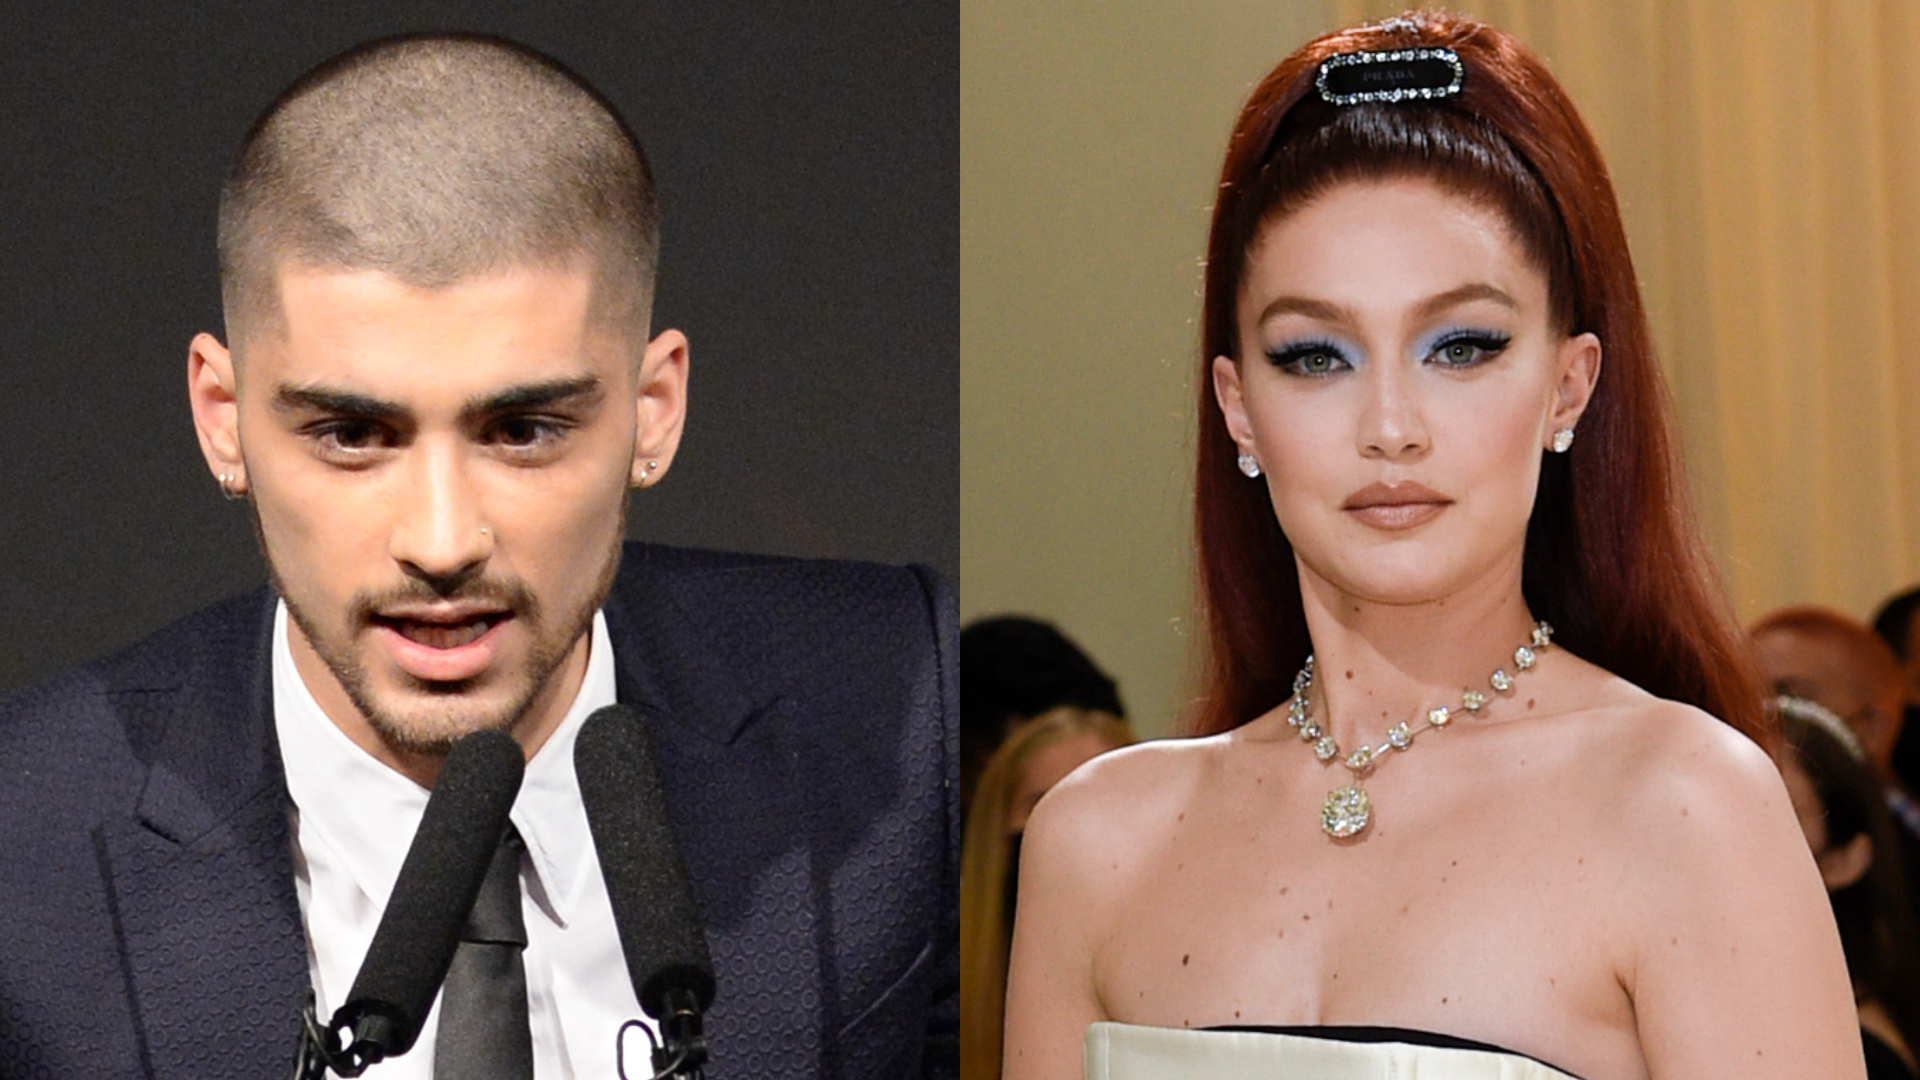 Zayn Malik on How Daughter Changed Him, Co-Parenting with Gigi Hadid, 2021  Harassment Charges